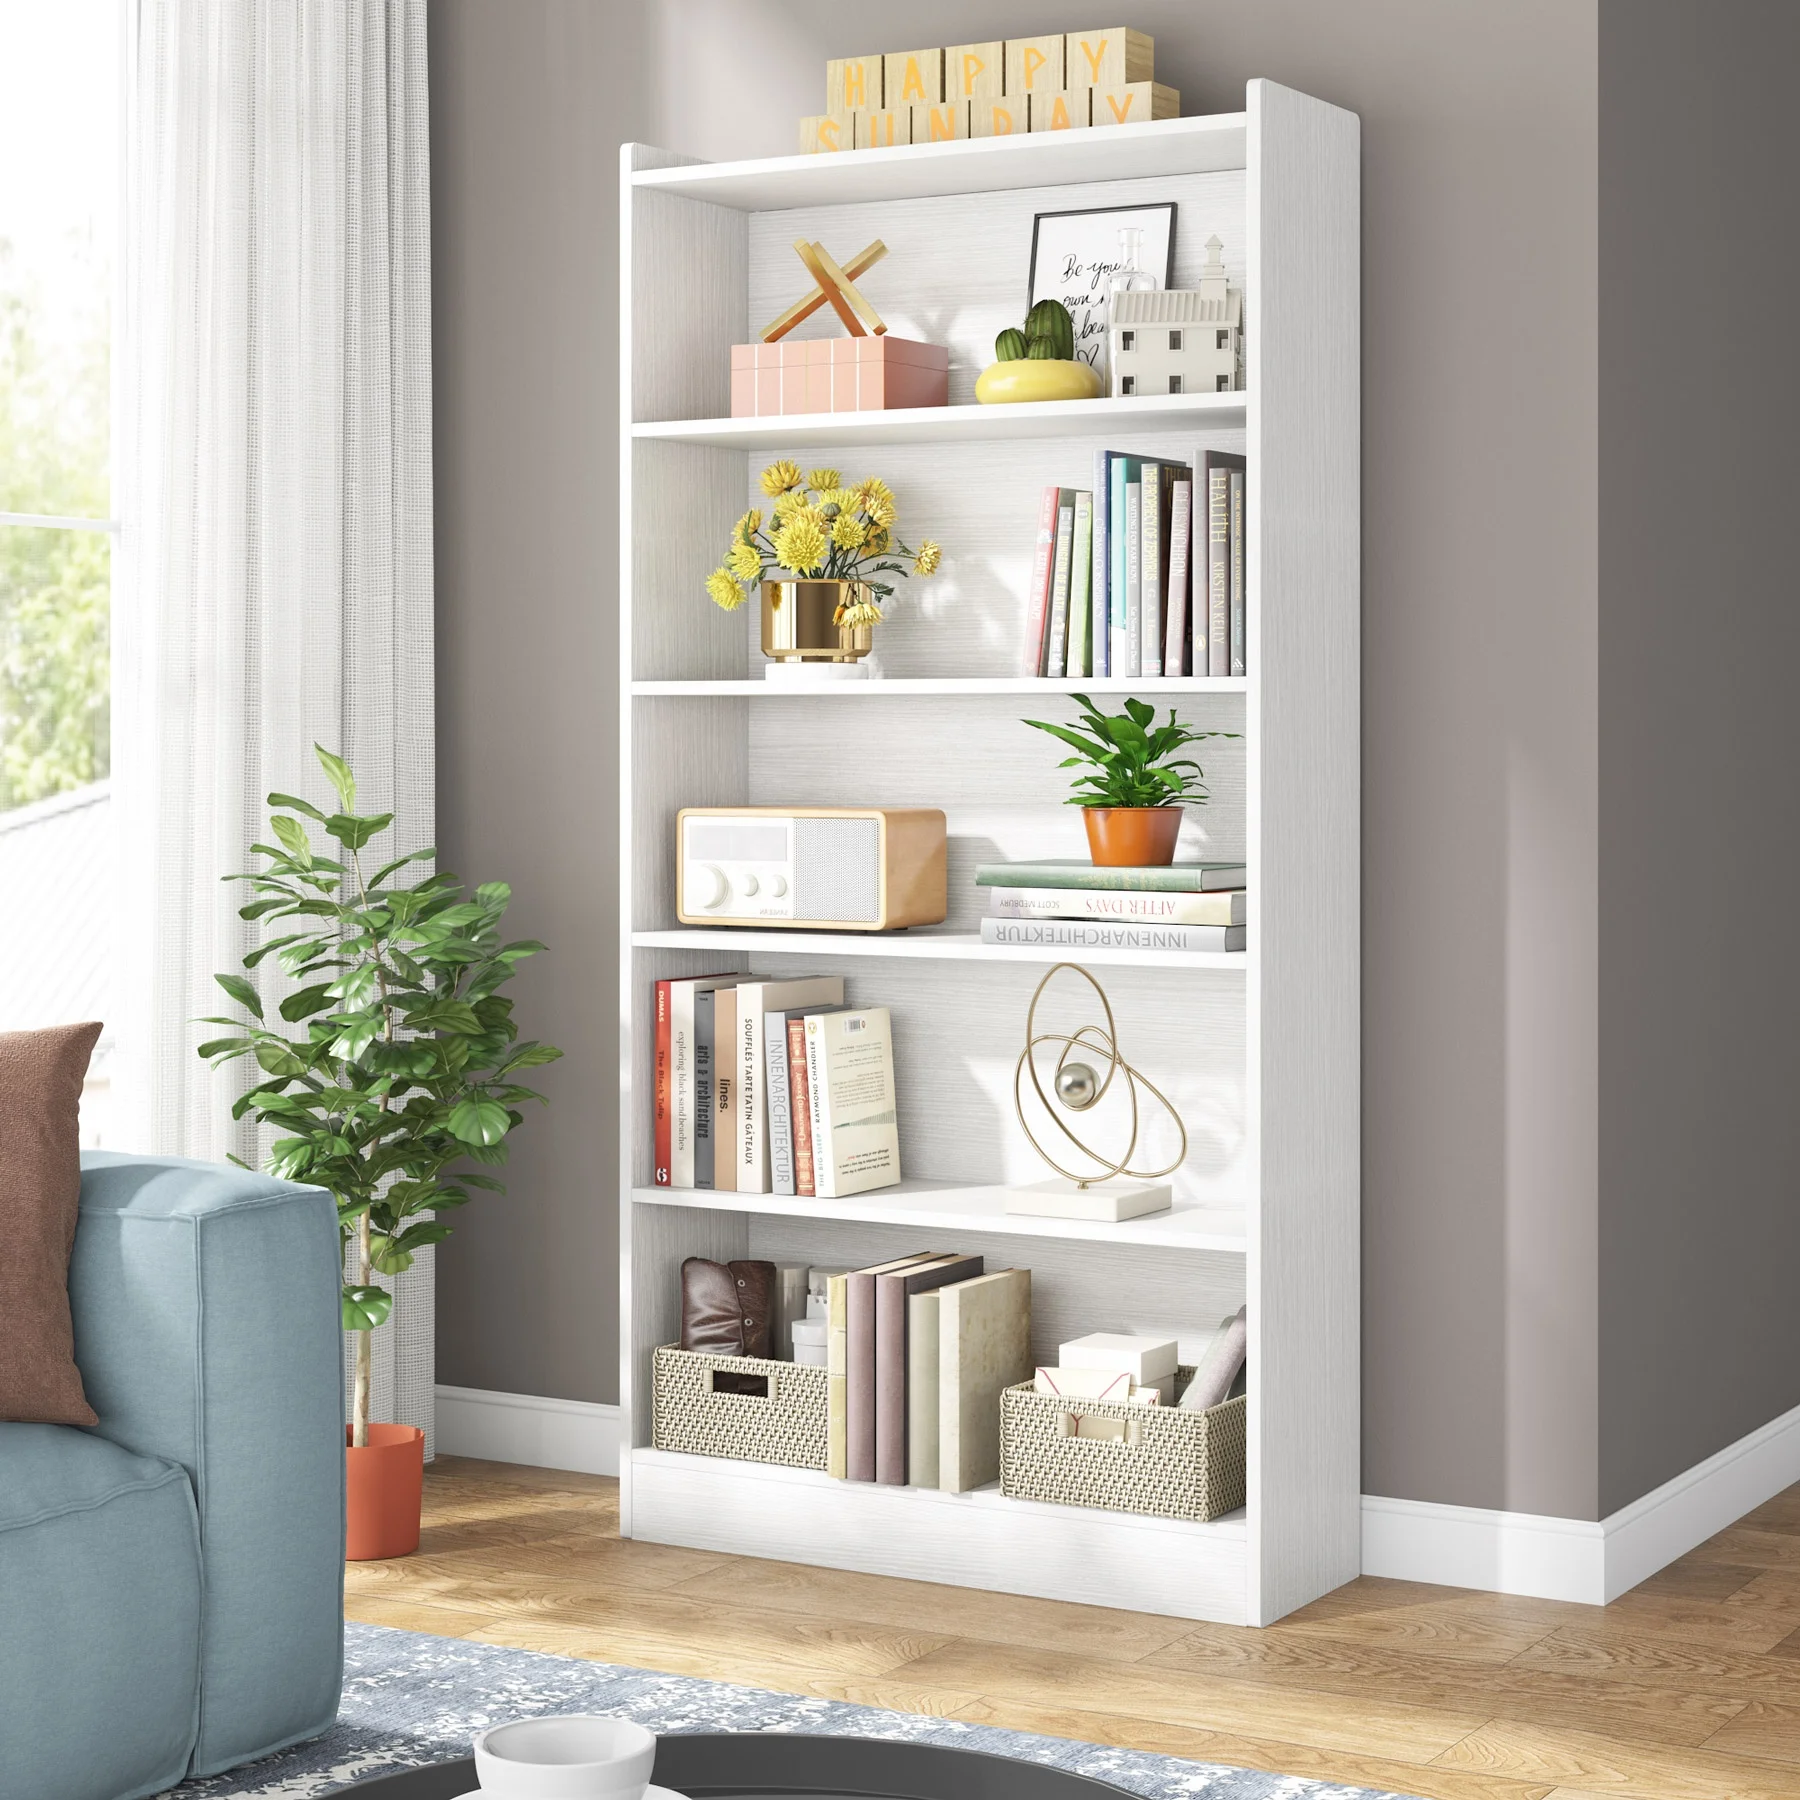 Tribesigns 72 inch Tall Bookcase White Library Bookshelf with Storage Shelves Large Open Bookcases Wood Display Shelving Unit